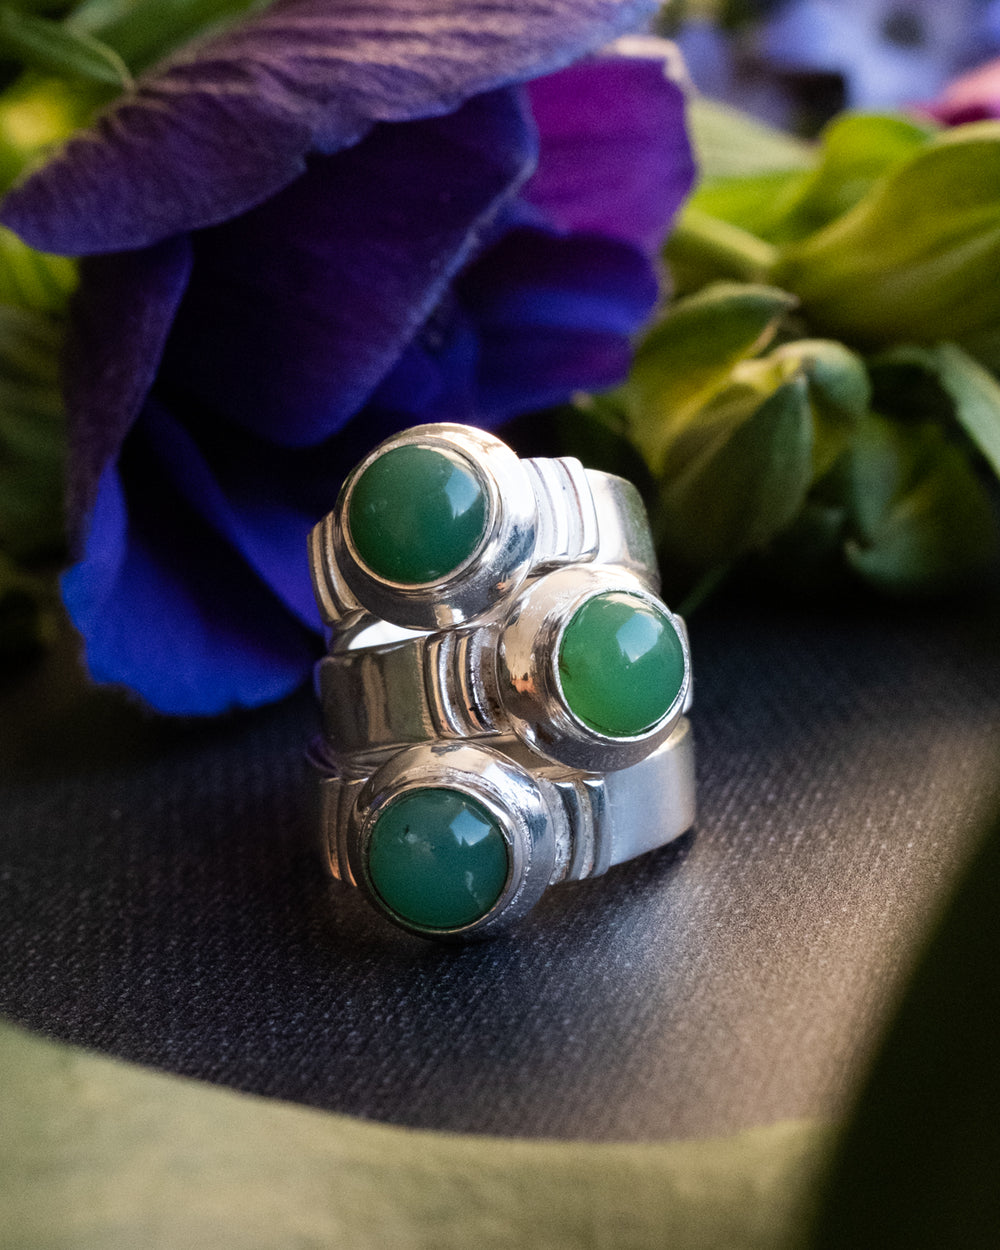 Chrysoprase Ring in Sterling Silver - The Healing Pear